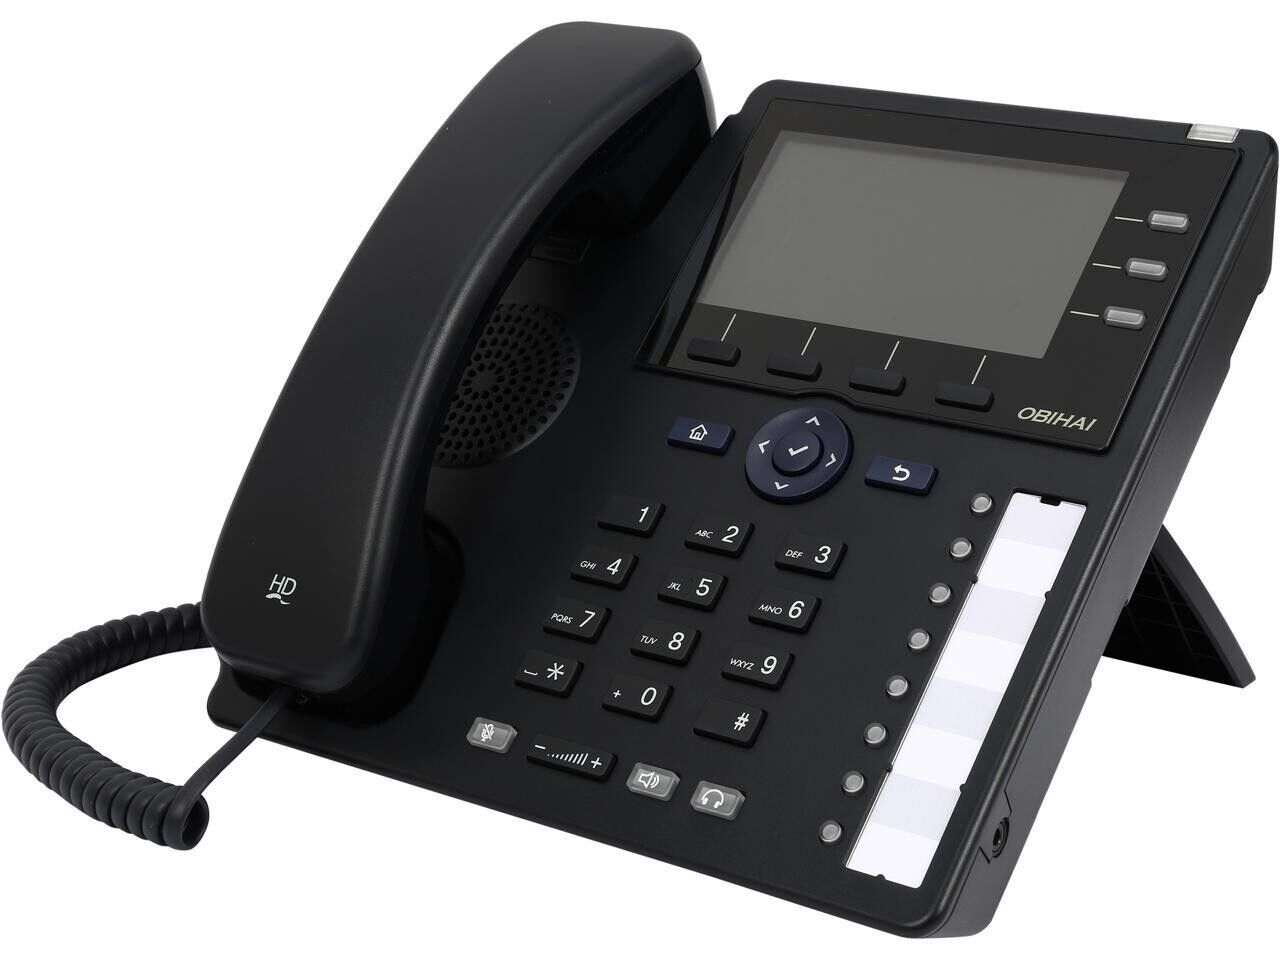 Obihai OBi1032PA Google Voice VOIP Phone with Power Supply - Up to 12 Lines